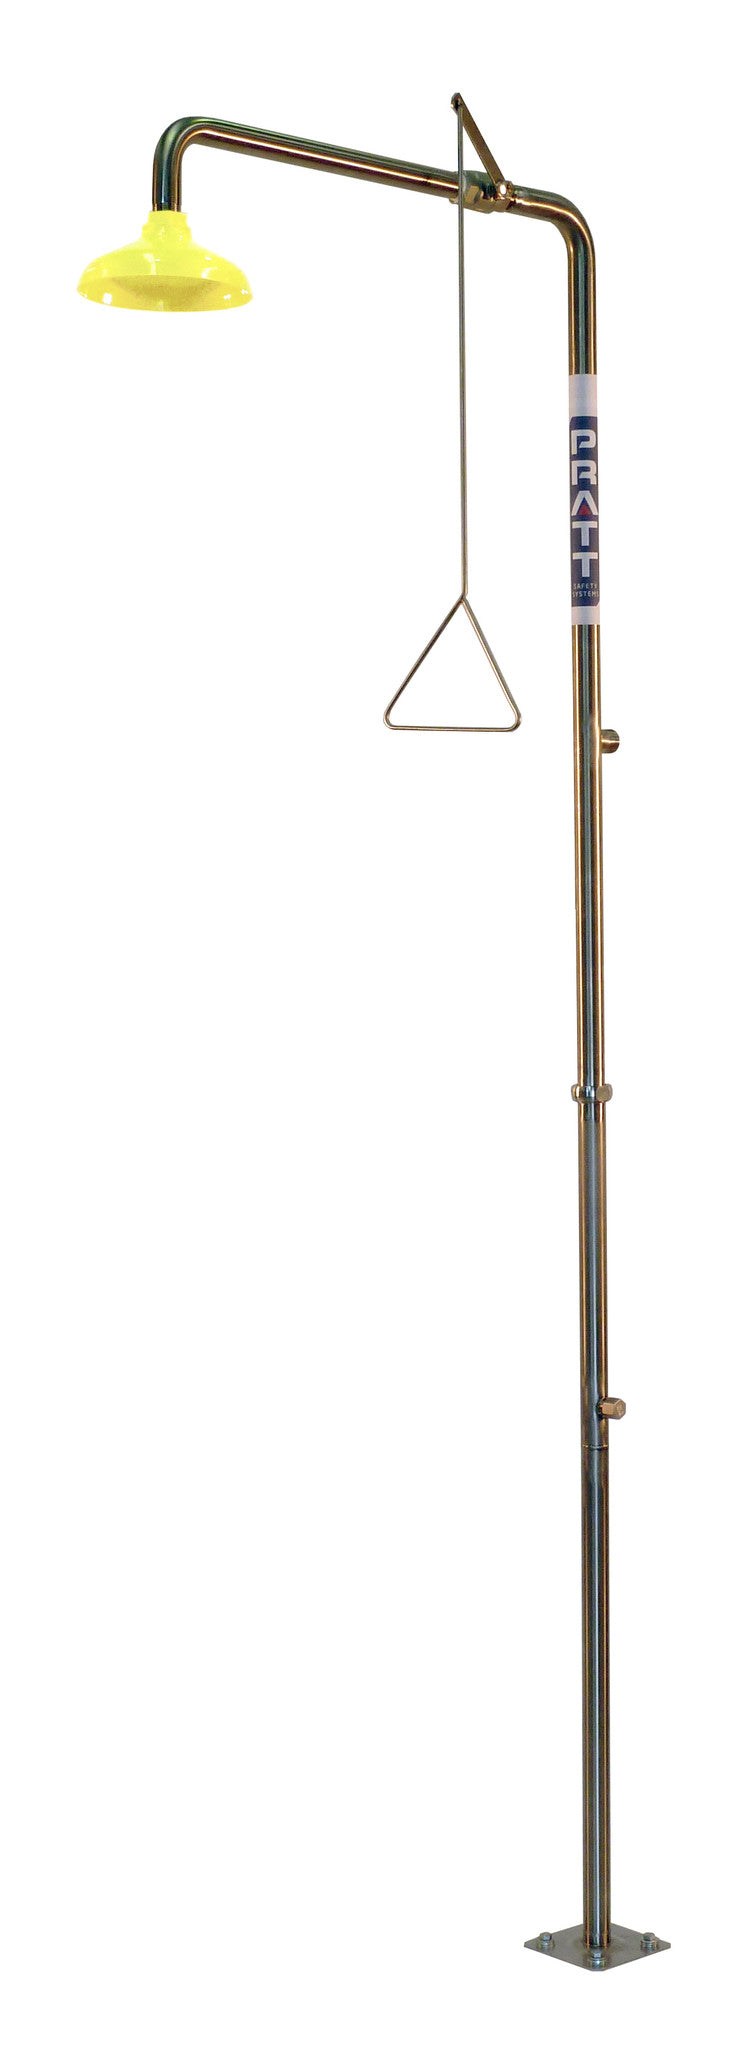 Emergency Safety Free Standing Deluge Shower, Emergency Safety Showers - DG Safety